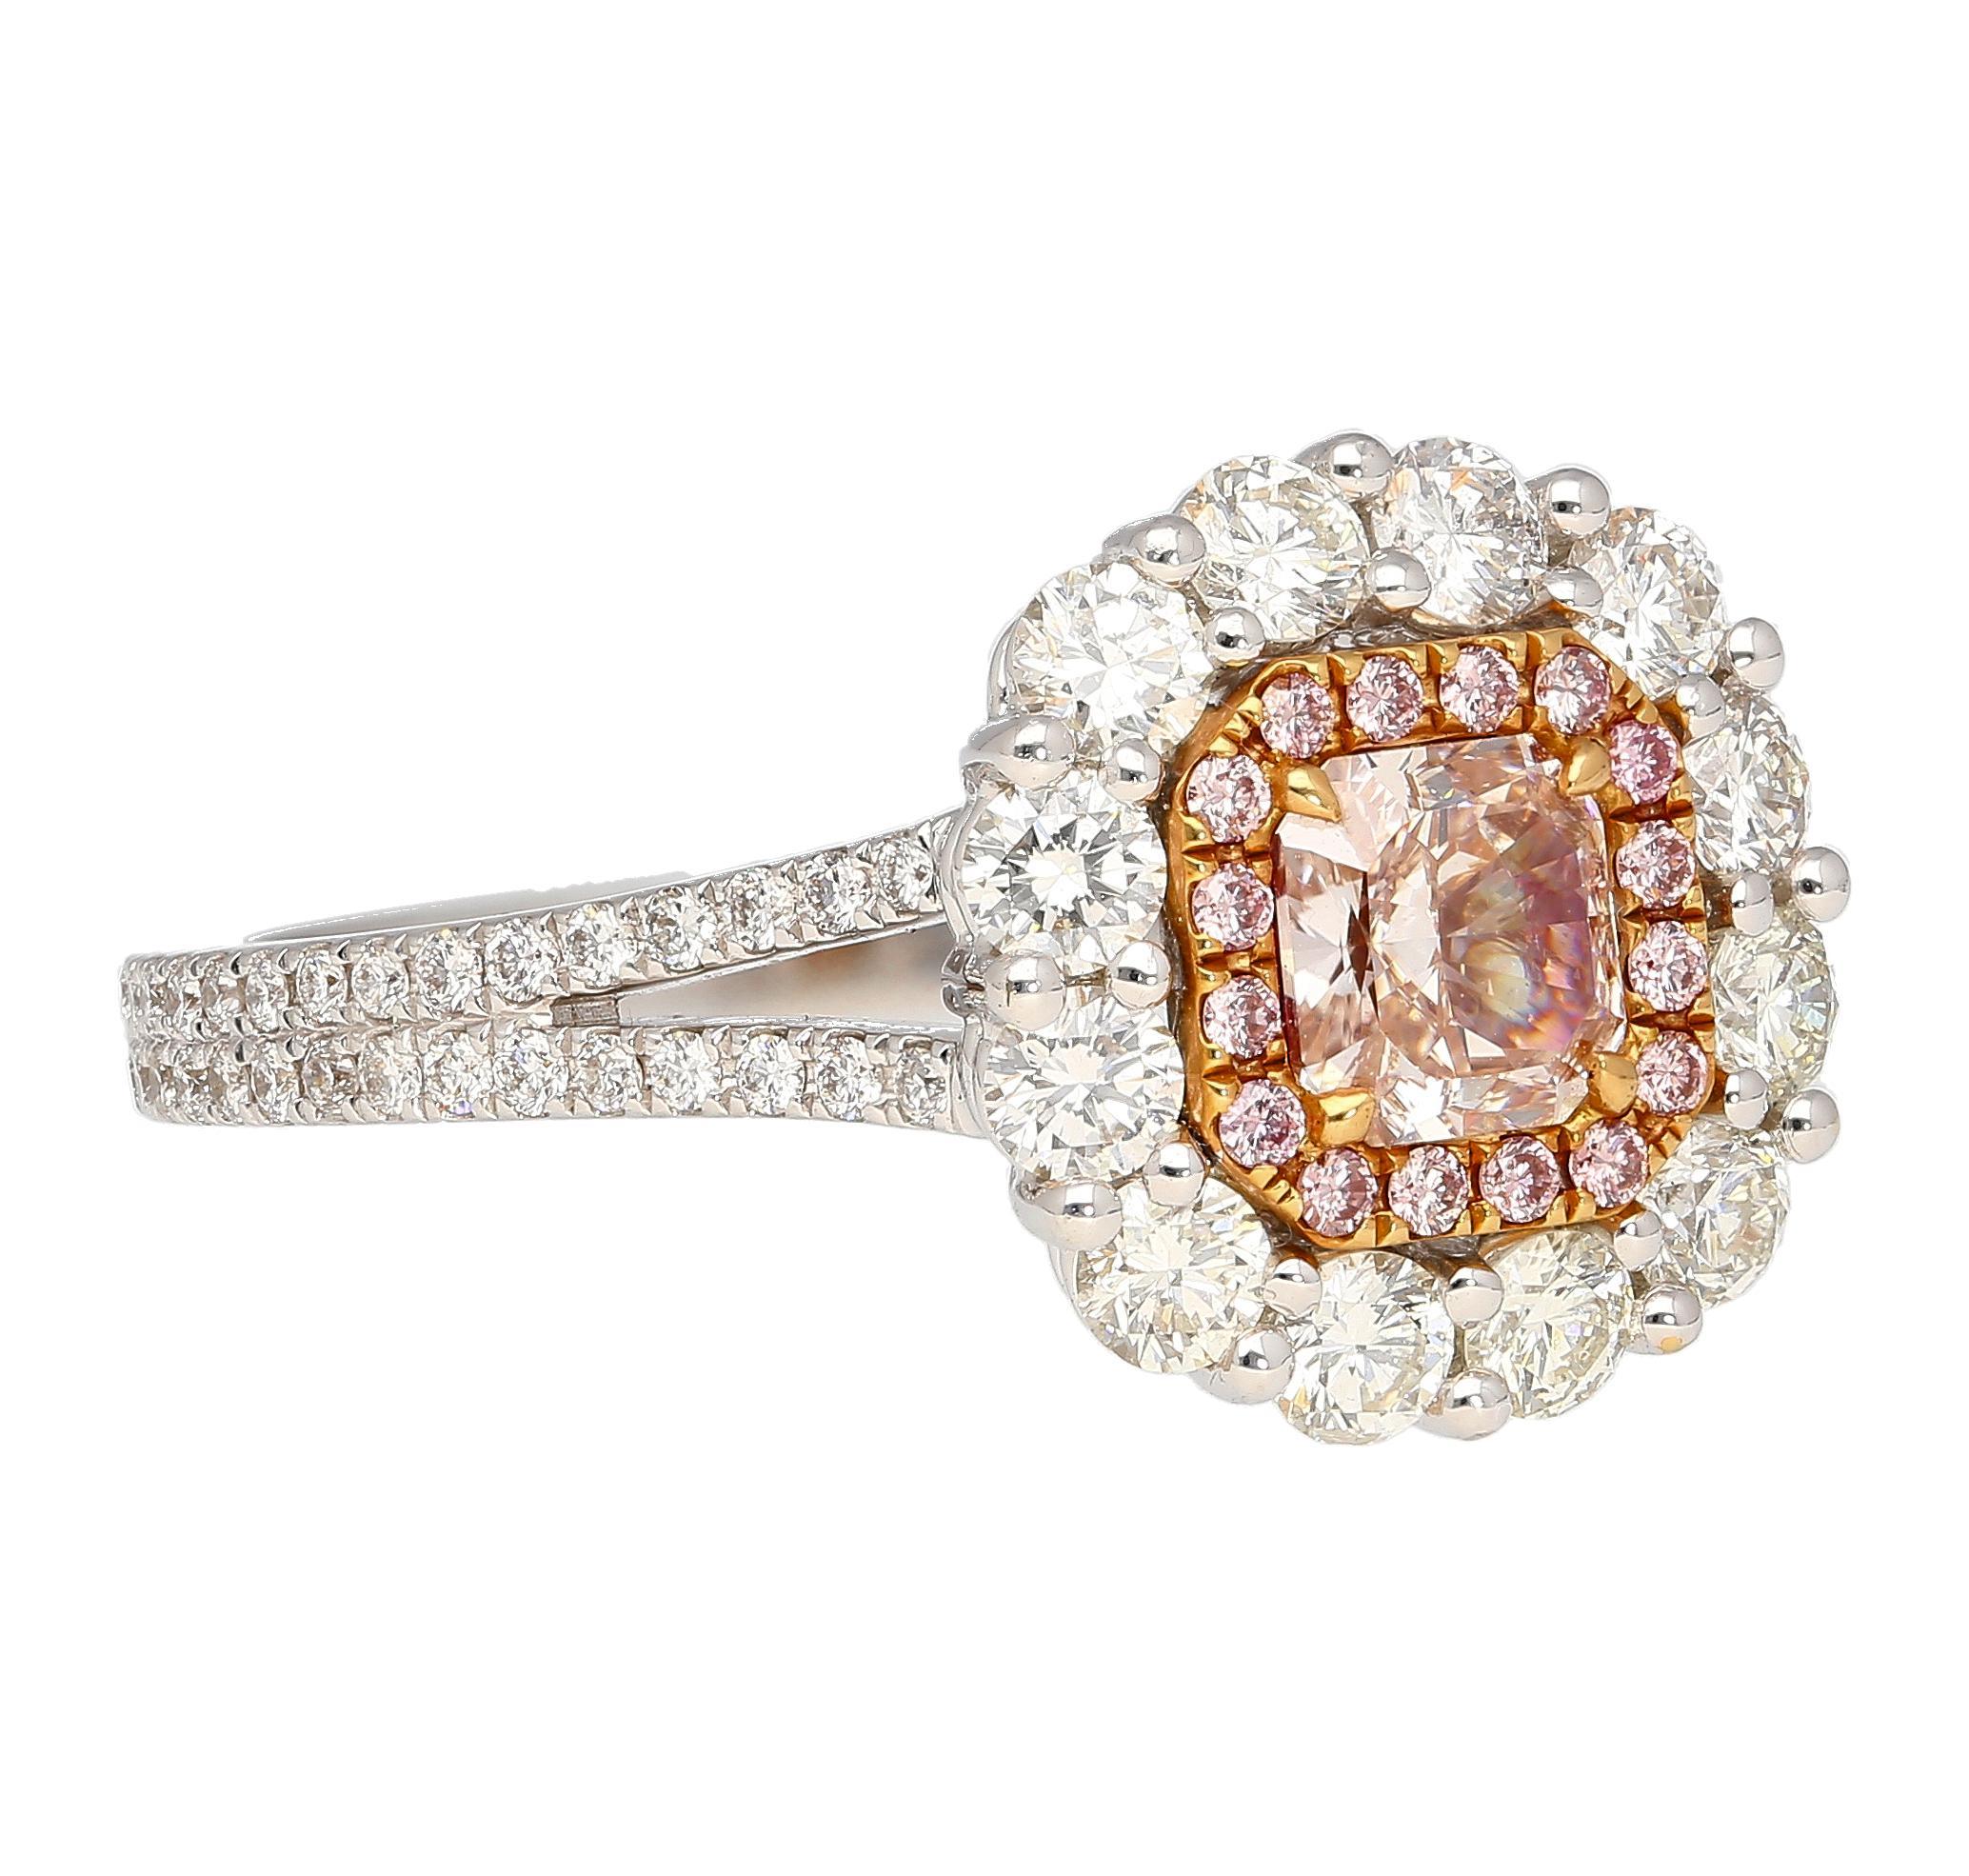 GIA Certified 1.51 Carat Fancy Light Brown Pink Internally Flawless Diamond Ring In New Condition For Sale In Miami, FL